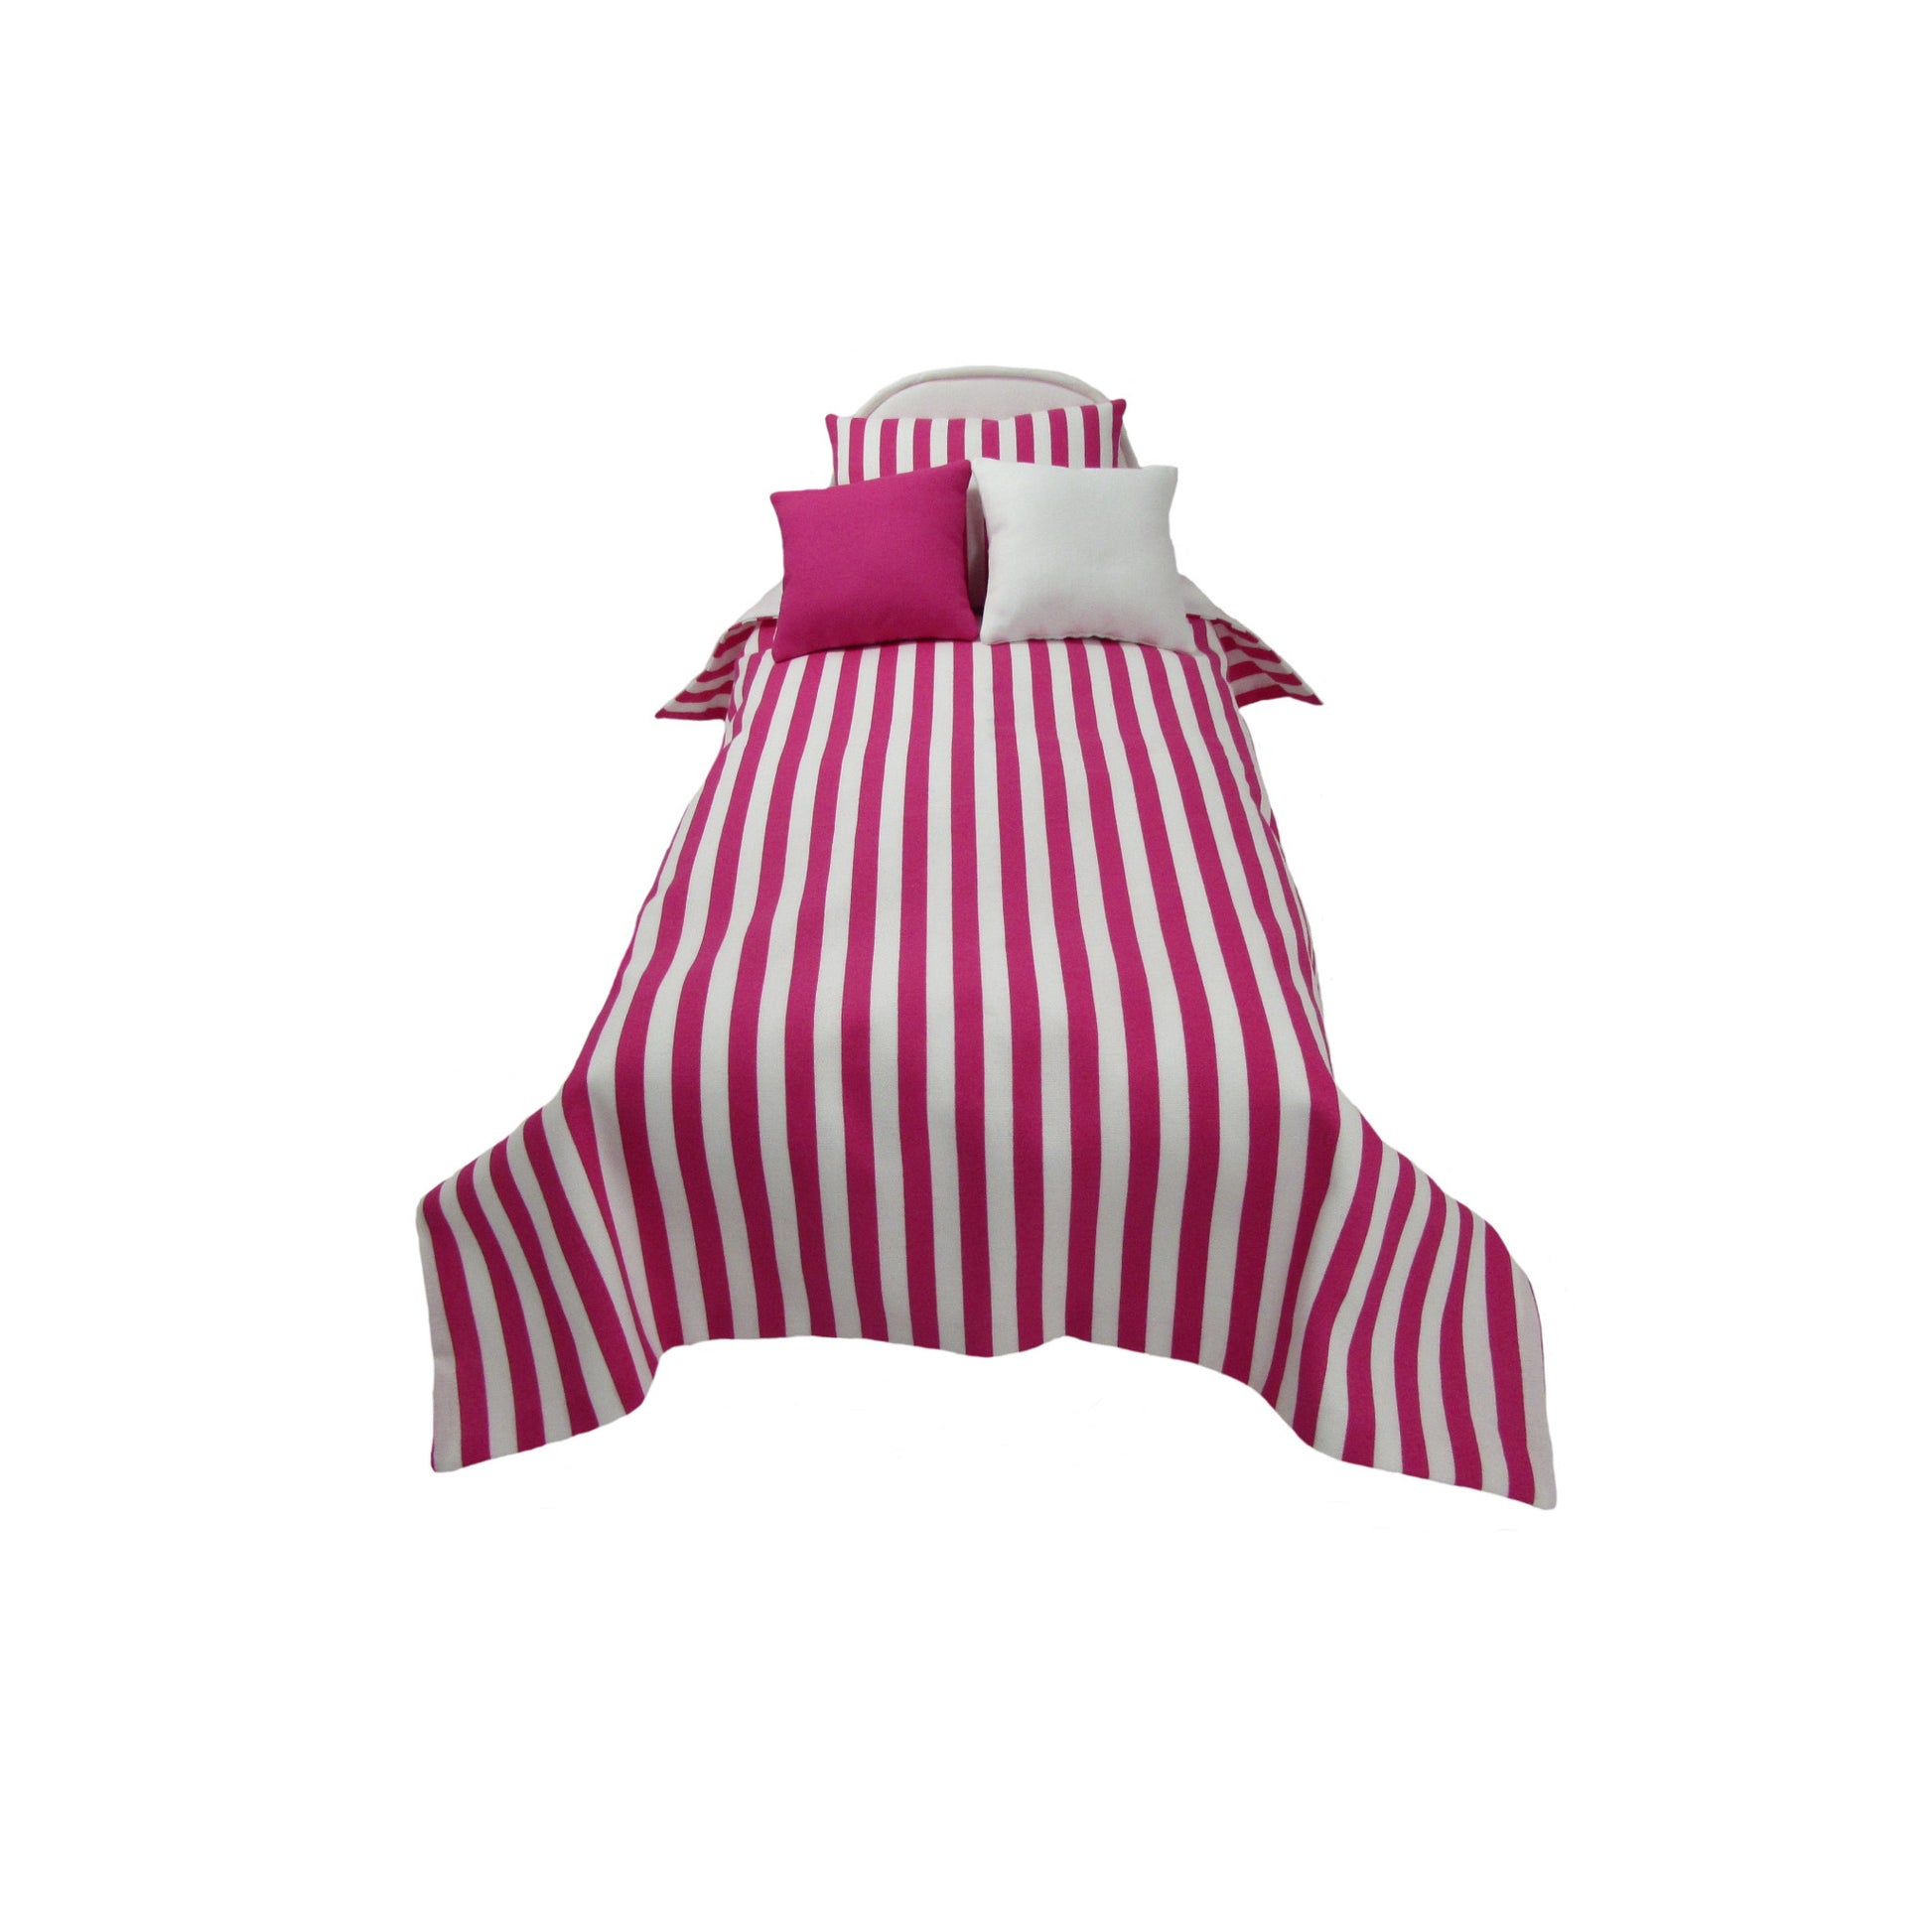 Upholstered White Doll Bed and Pink White Stripes Doll Bedding for 14.5-inch dolls Second view